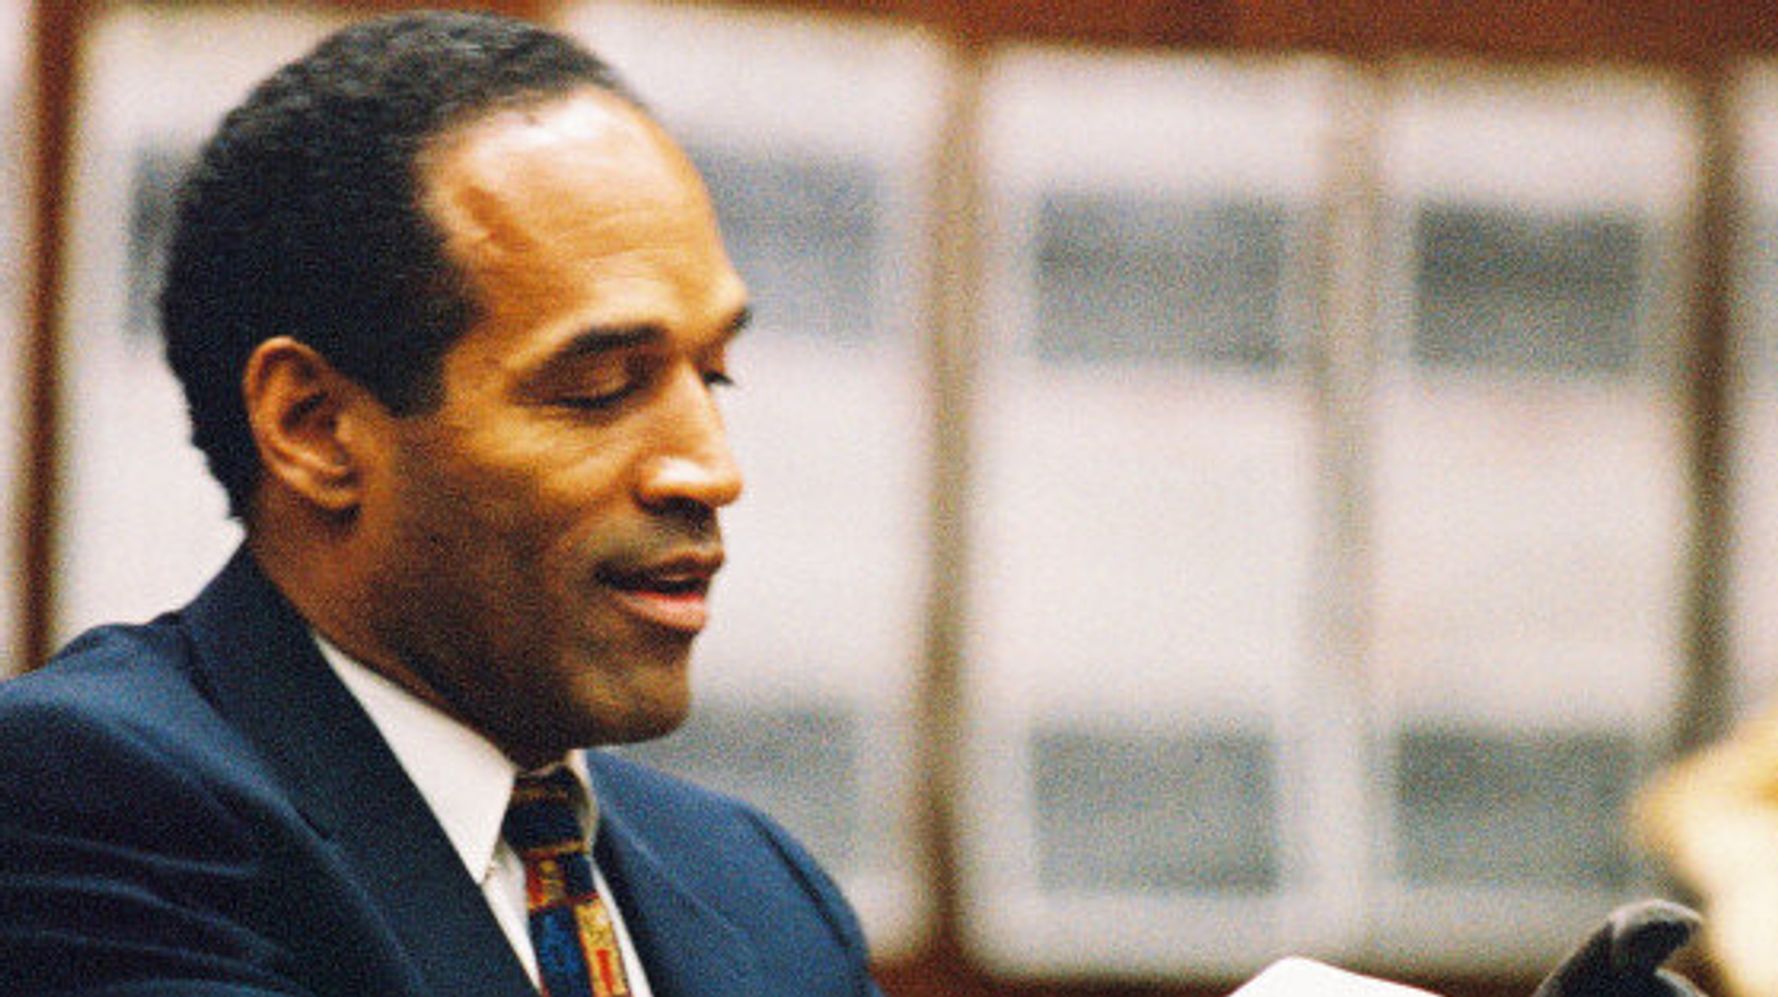 O.J. Simpsons Ex-Manager Says He Knows Who Committed Murders